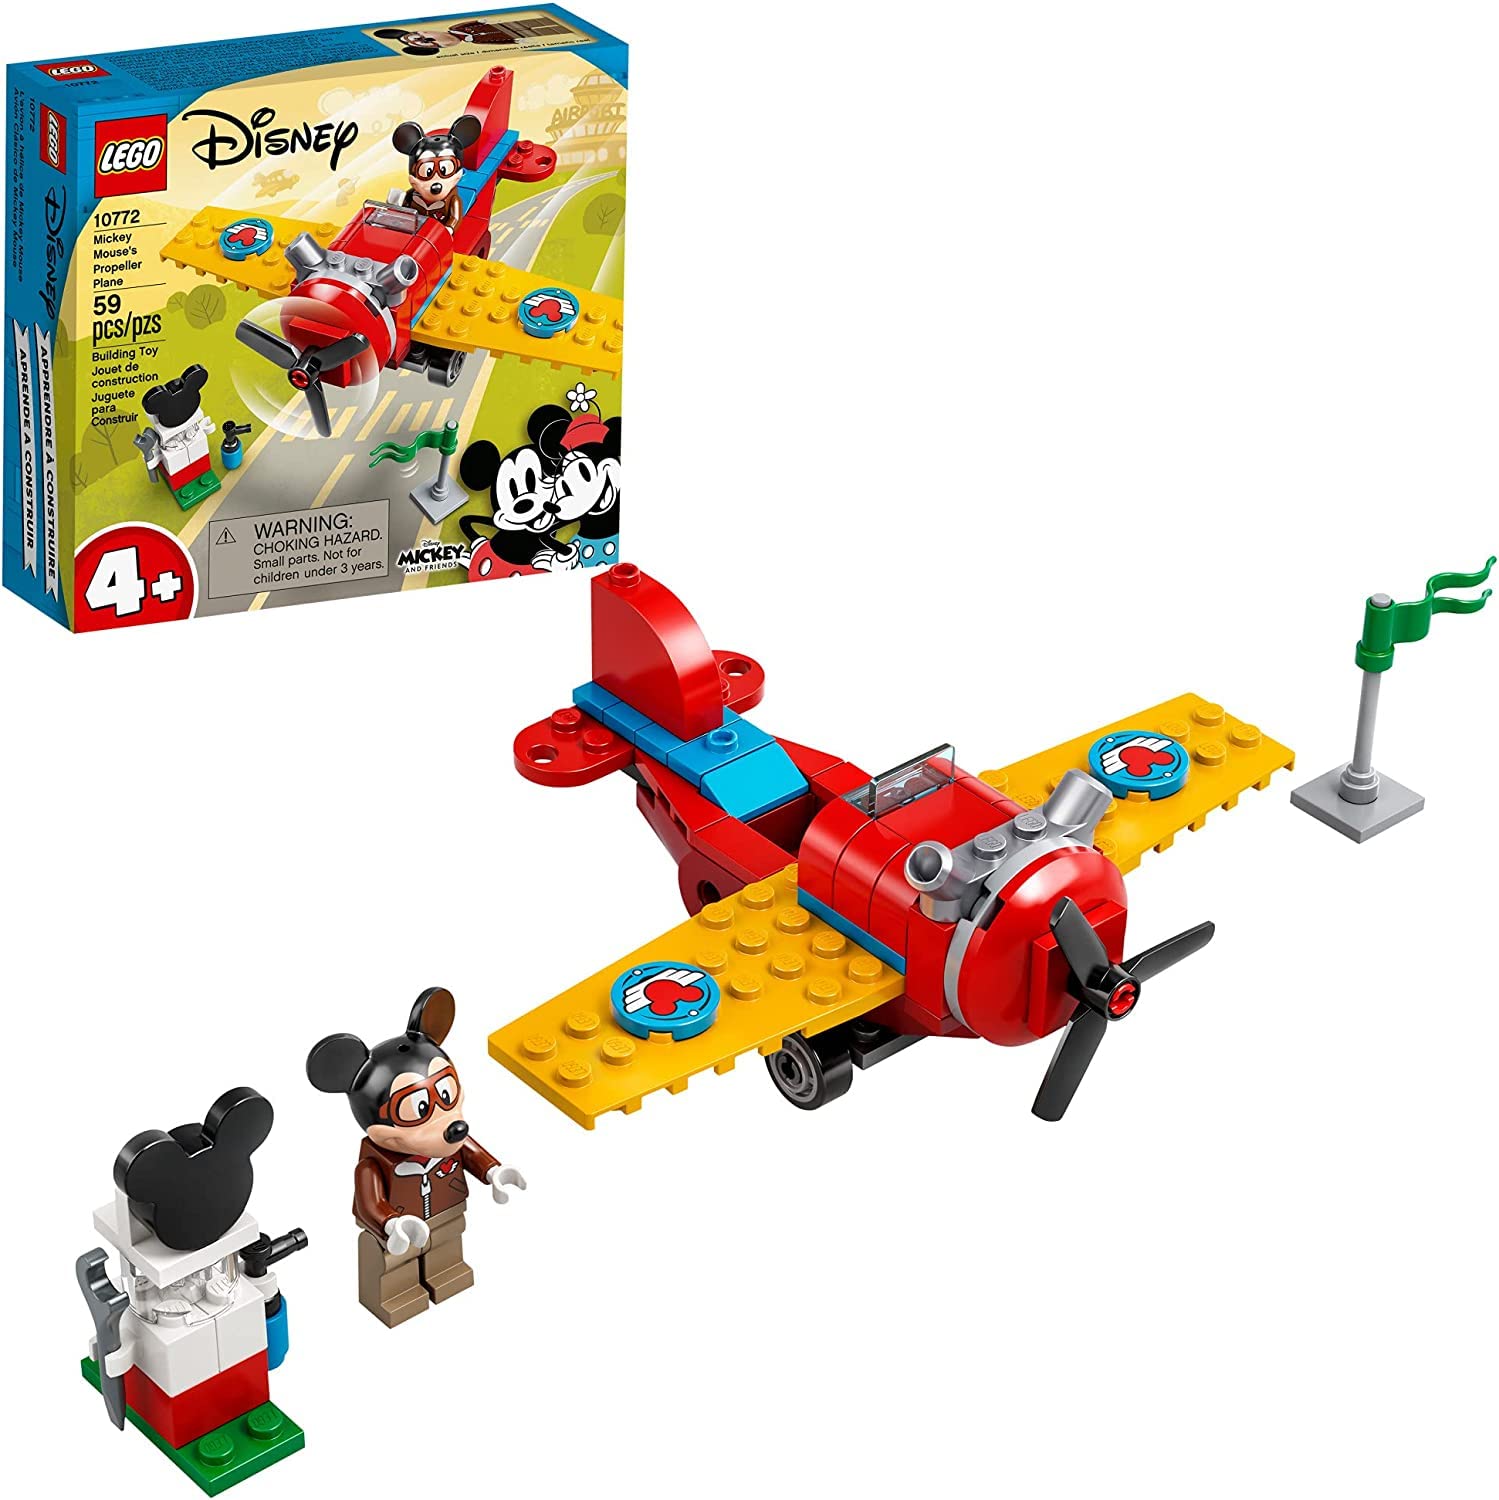 Mickey Mouse’s Propeller Plane